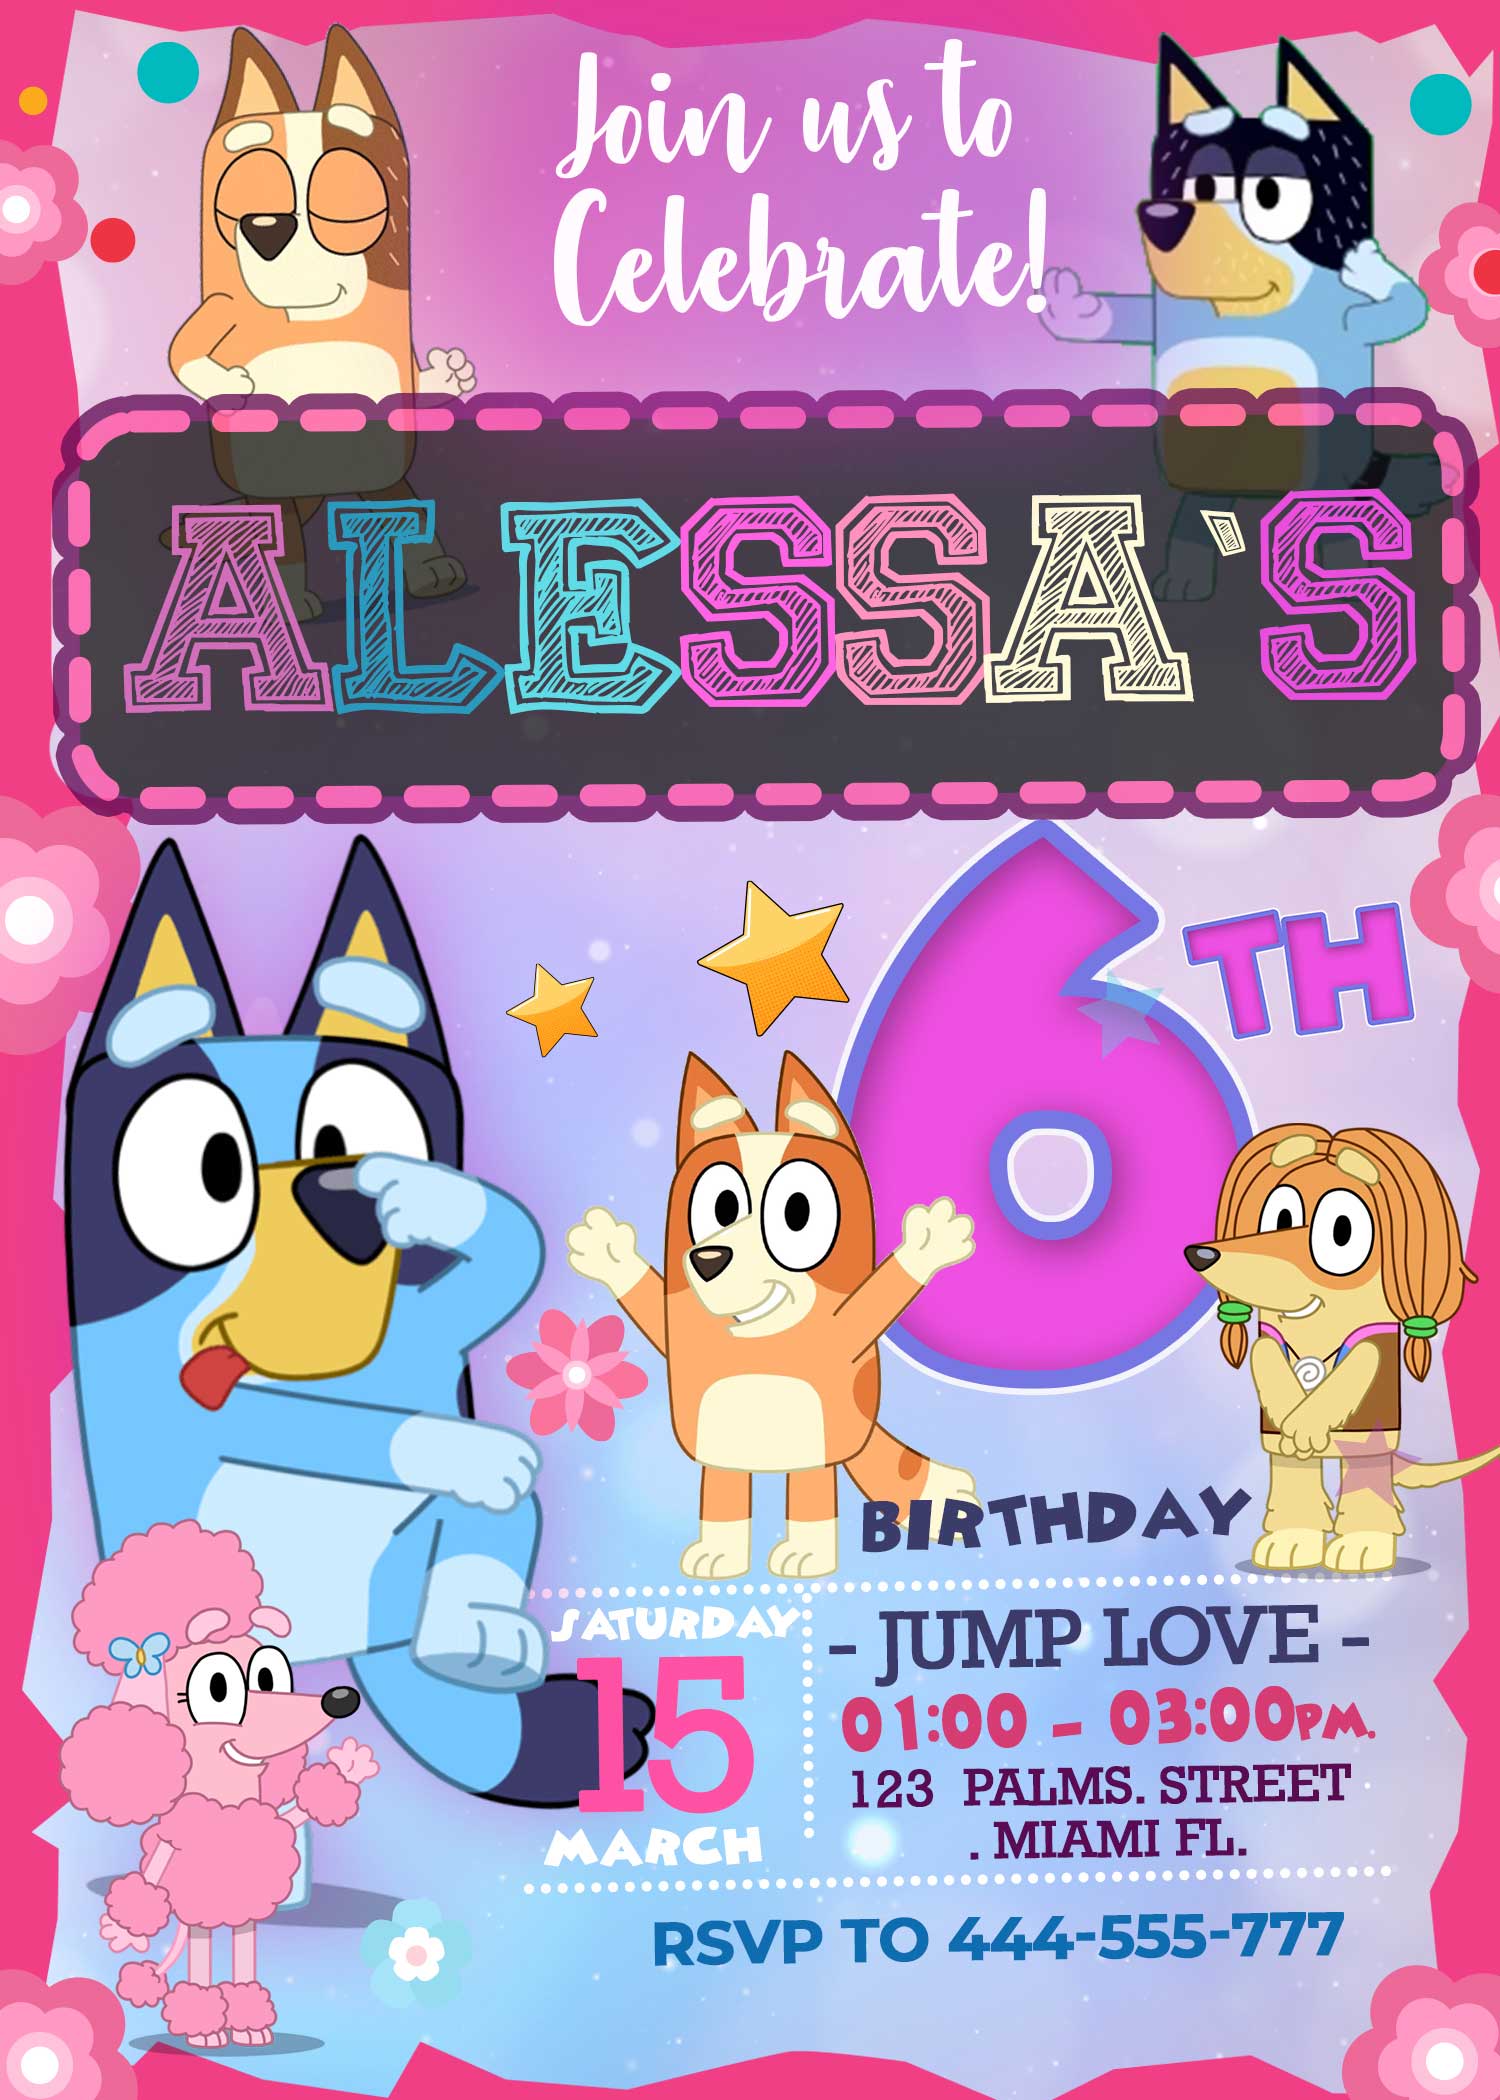 bluey-pastel-pink-and-purple-birthday-party-invitation-with-or-without-photo-printed-or-digital